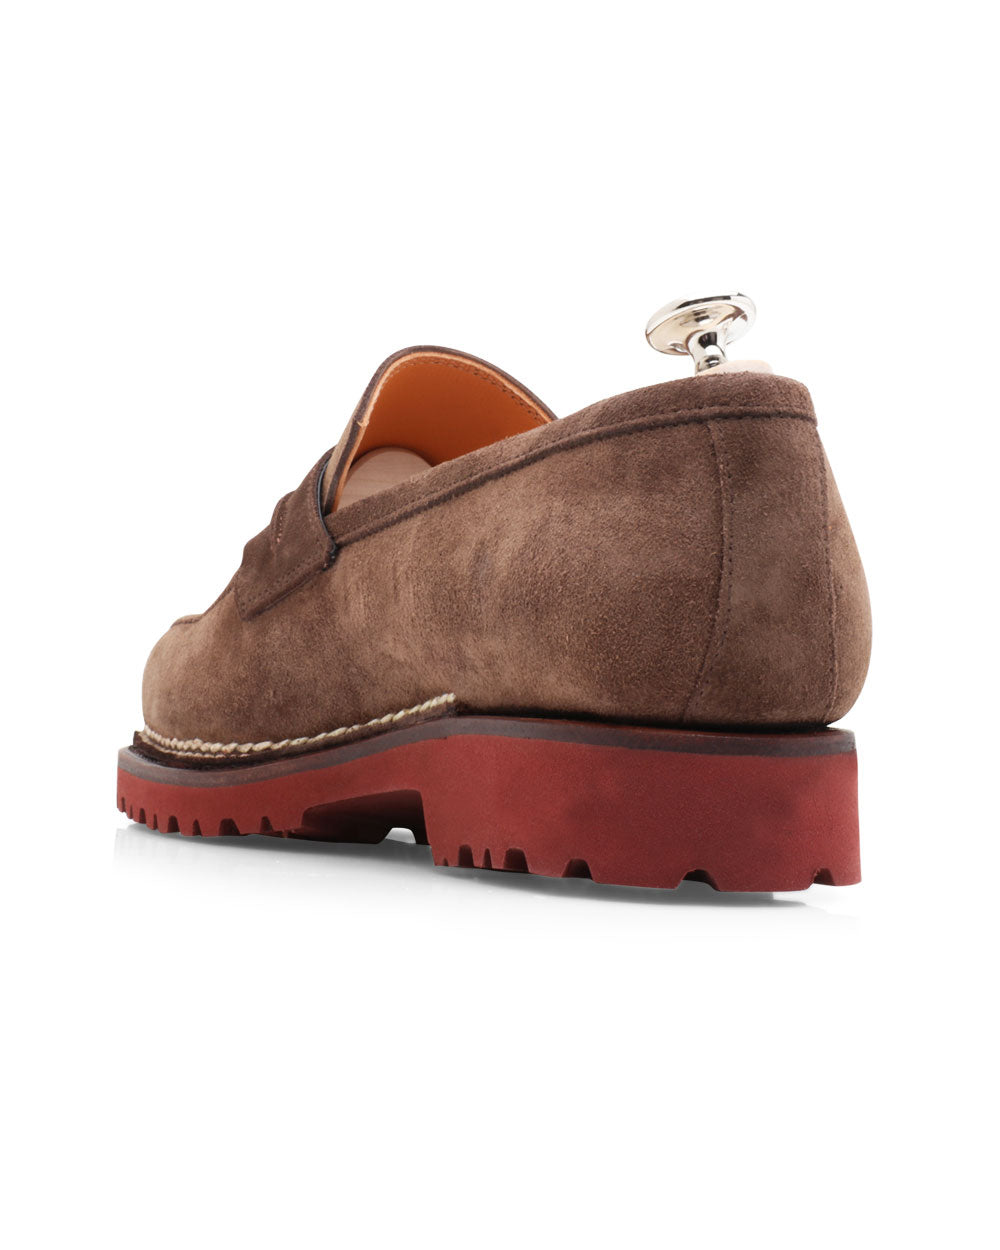 Capitano Suede Penny Loafer with Lug Sole in Tortora